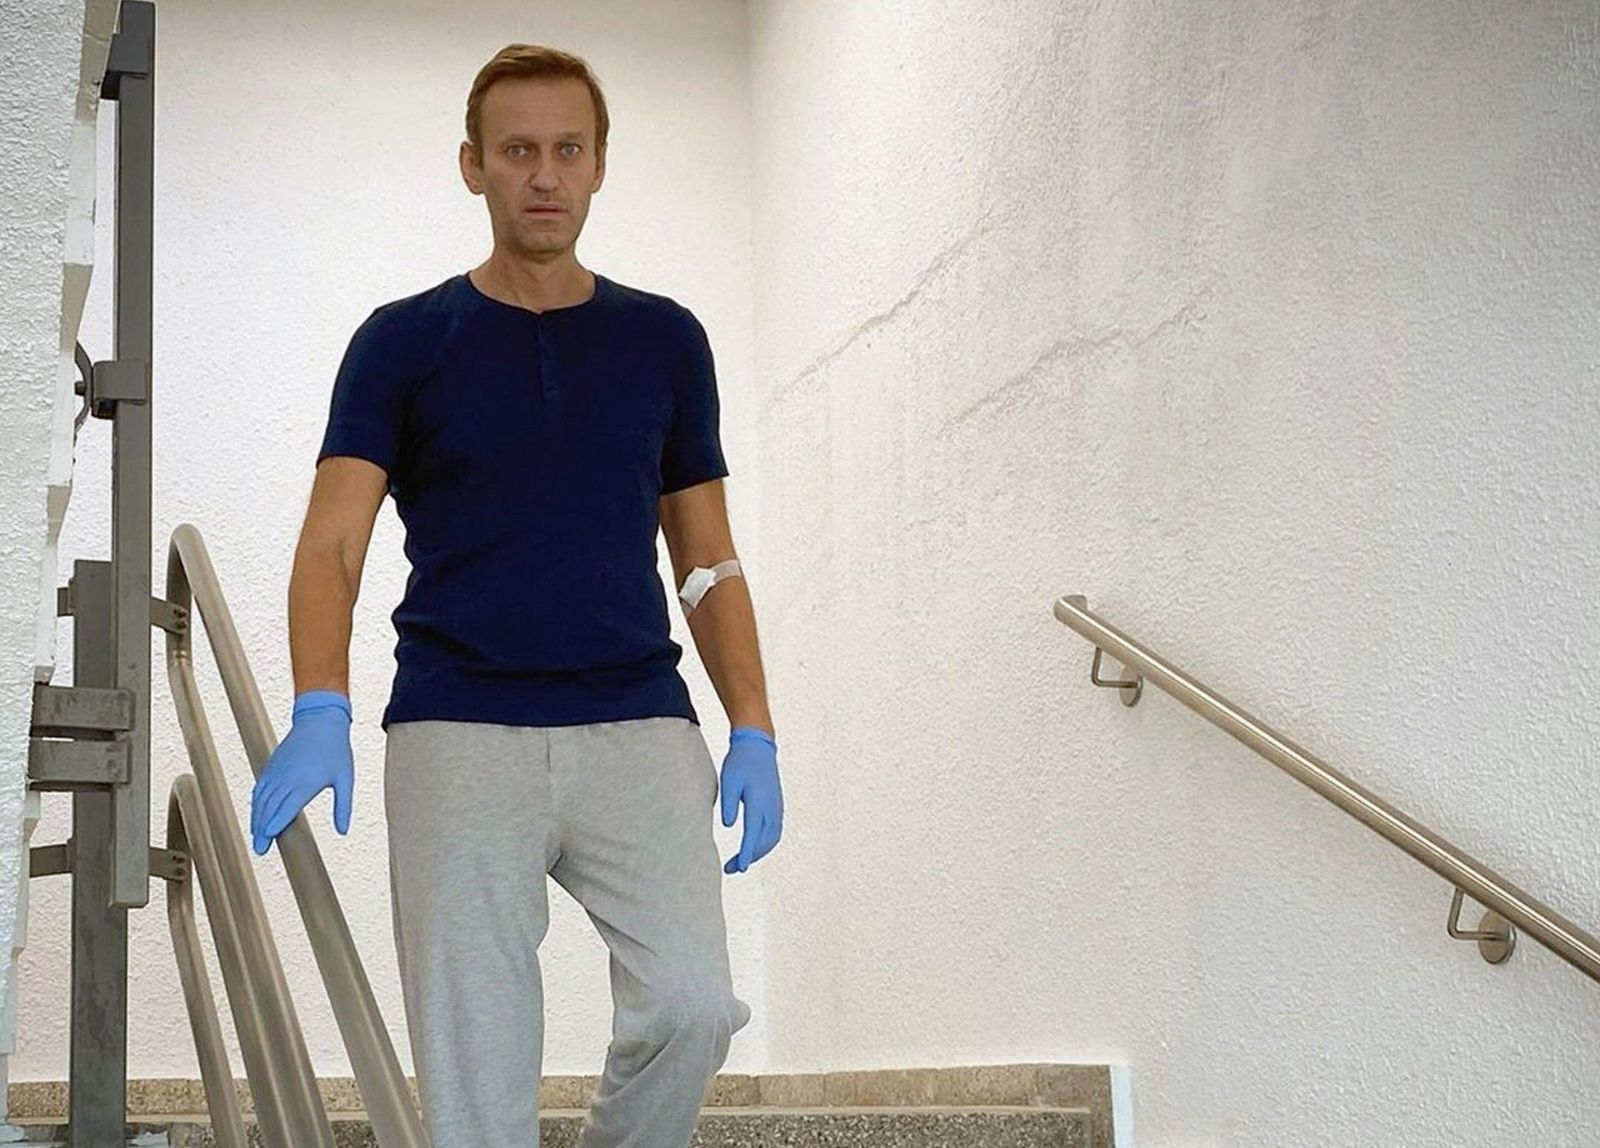 (FILES) This handout picture posted on September 19, 2020 on the Instagram account of @navalny shows Russian opposition leader Alexei Navalny in Berlin's Charite hospital. Russian opposition leader Alexei Navalny died on February 16, 2024 at the Arctic prison colony where he was serving a 19-year-term, Russia's federal penitentiary service said in a statement. (Photo by Handout / Instagram account @navalny / AFP) / RESTRICTED TO EDITORIAL USE - MANDATORY CREDIT 'AFP PHOTO / Instagram account @navalny / handout' - NO MARKETING - NO ADVERTISING CAMPAIGNS - DISTRIBUTED AS A SERVICE TO CLIENTS